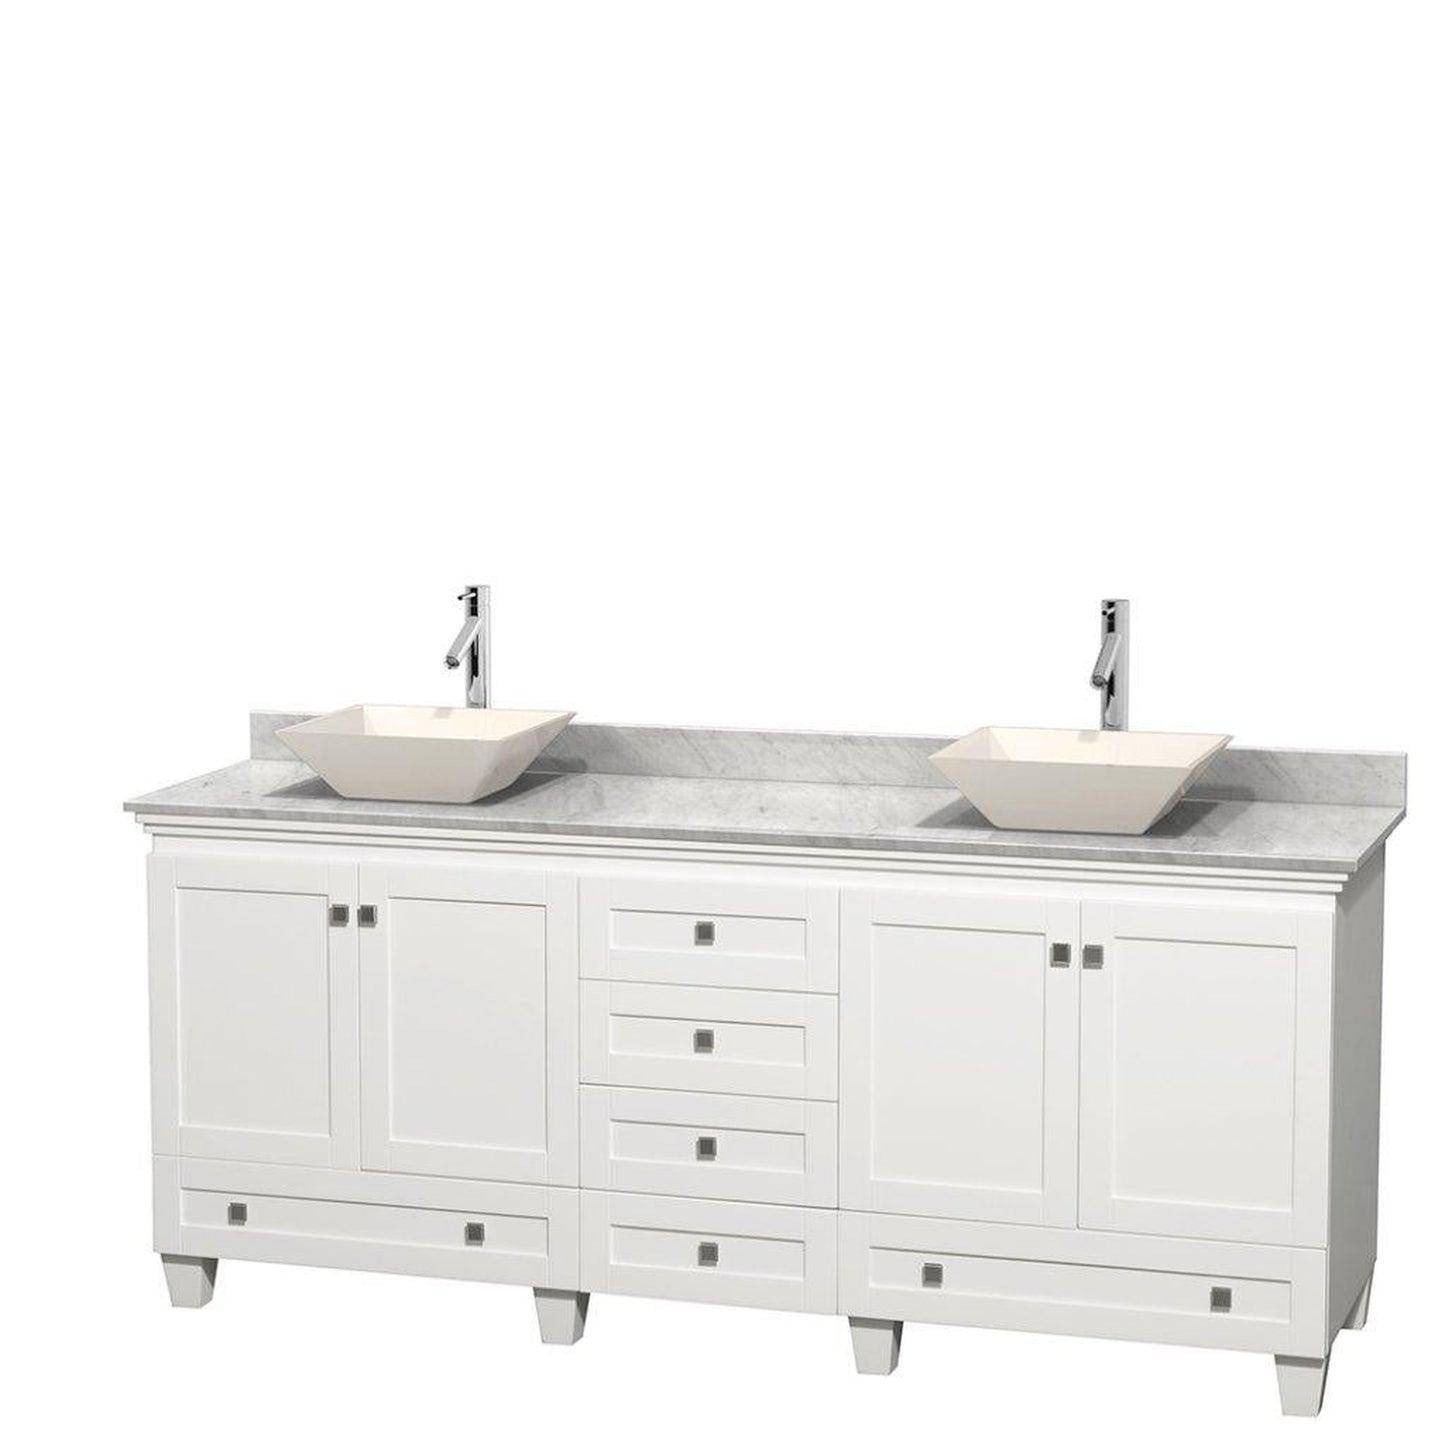 Wyndham Collection Acclaim 80" Double Bathroom White Vanity With White Carrara Marble Countertop And Pyra Bone Porcelain Sinks